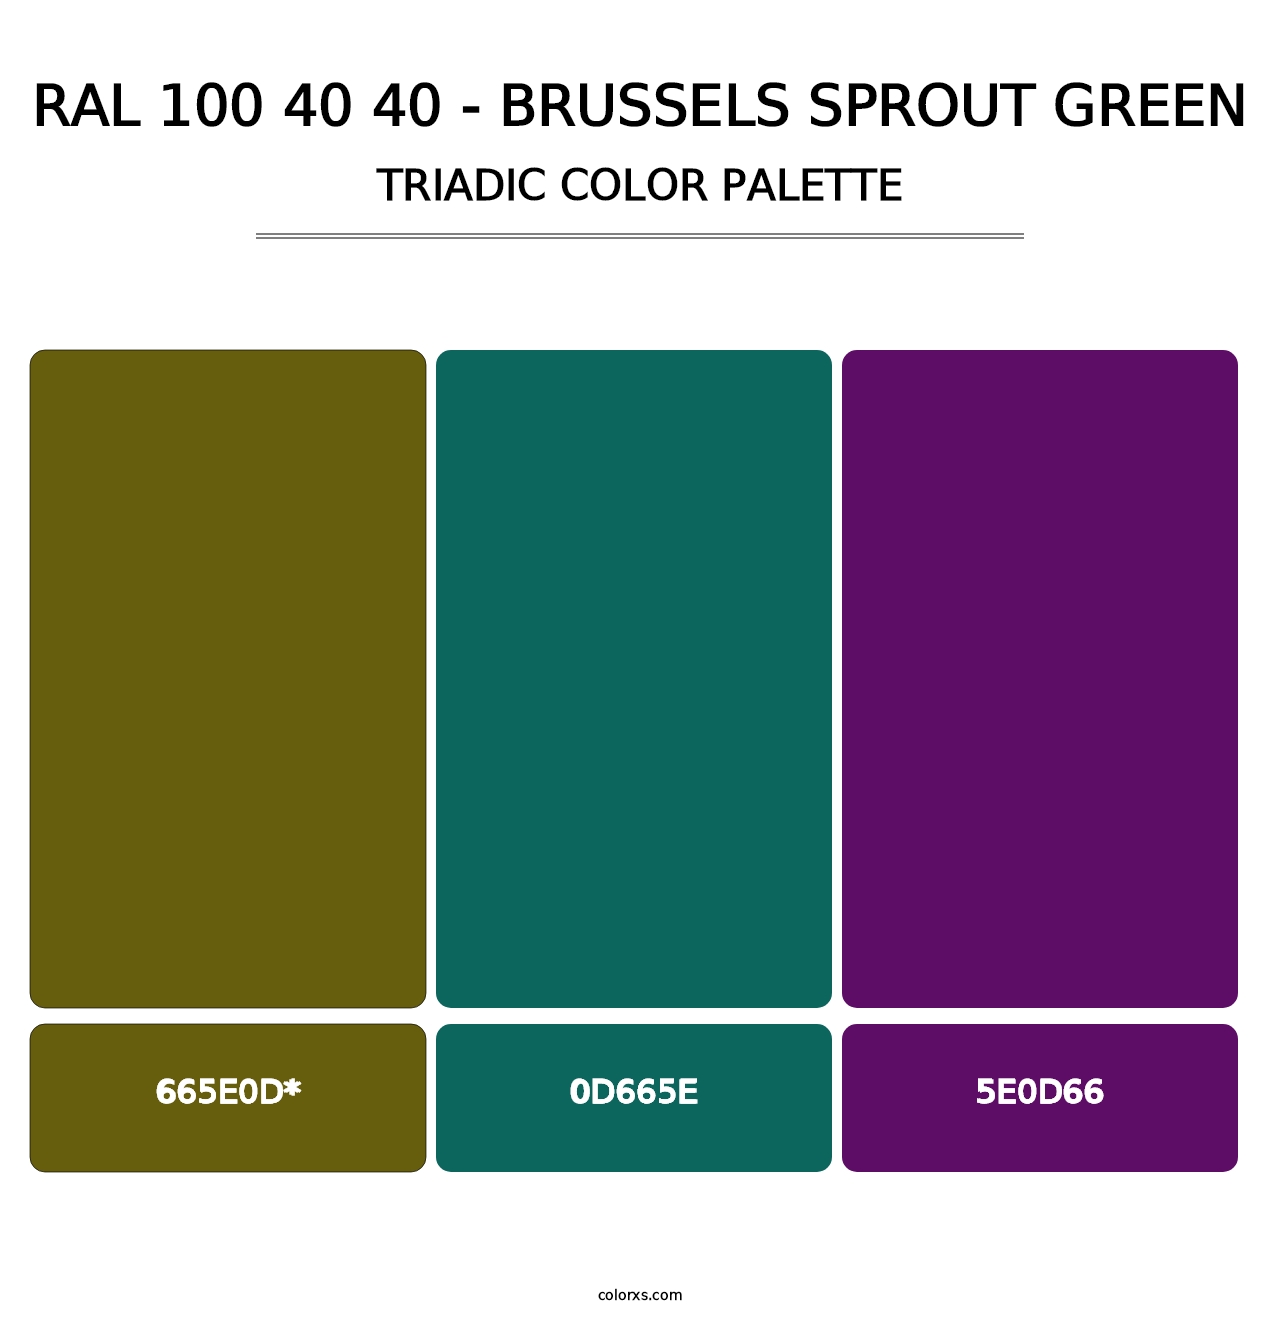 RAL 100 40 40 - Brussels Sprout Green - Triadic Color Palette